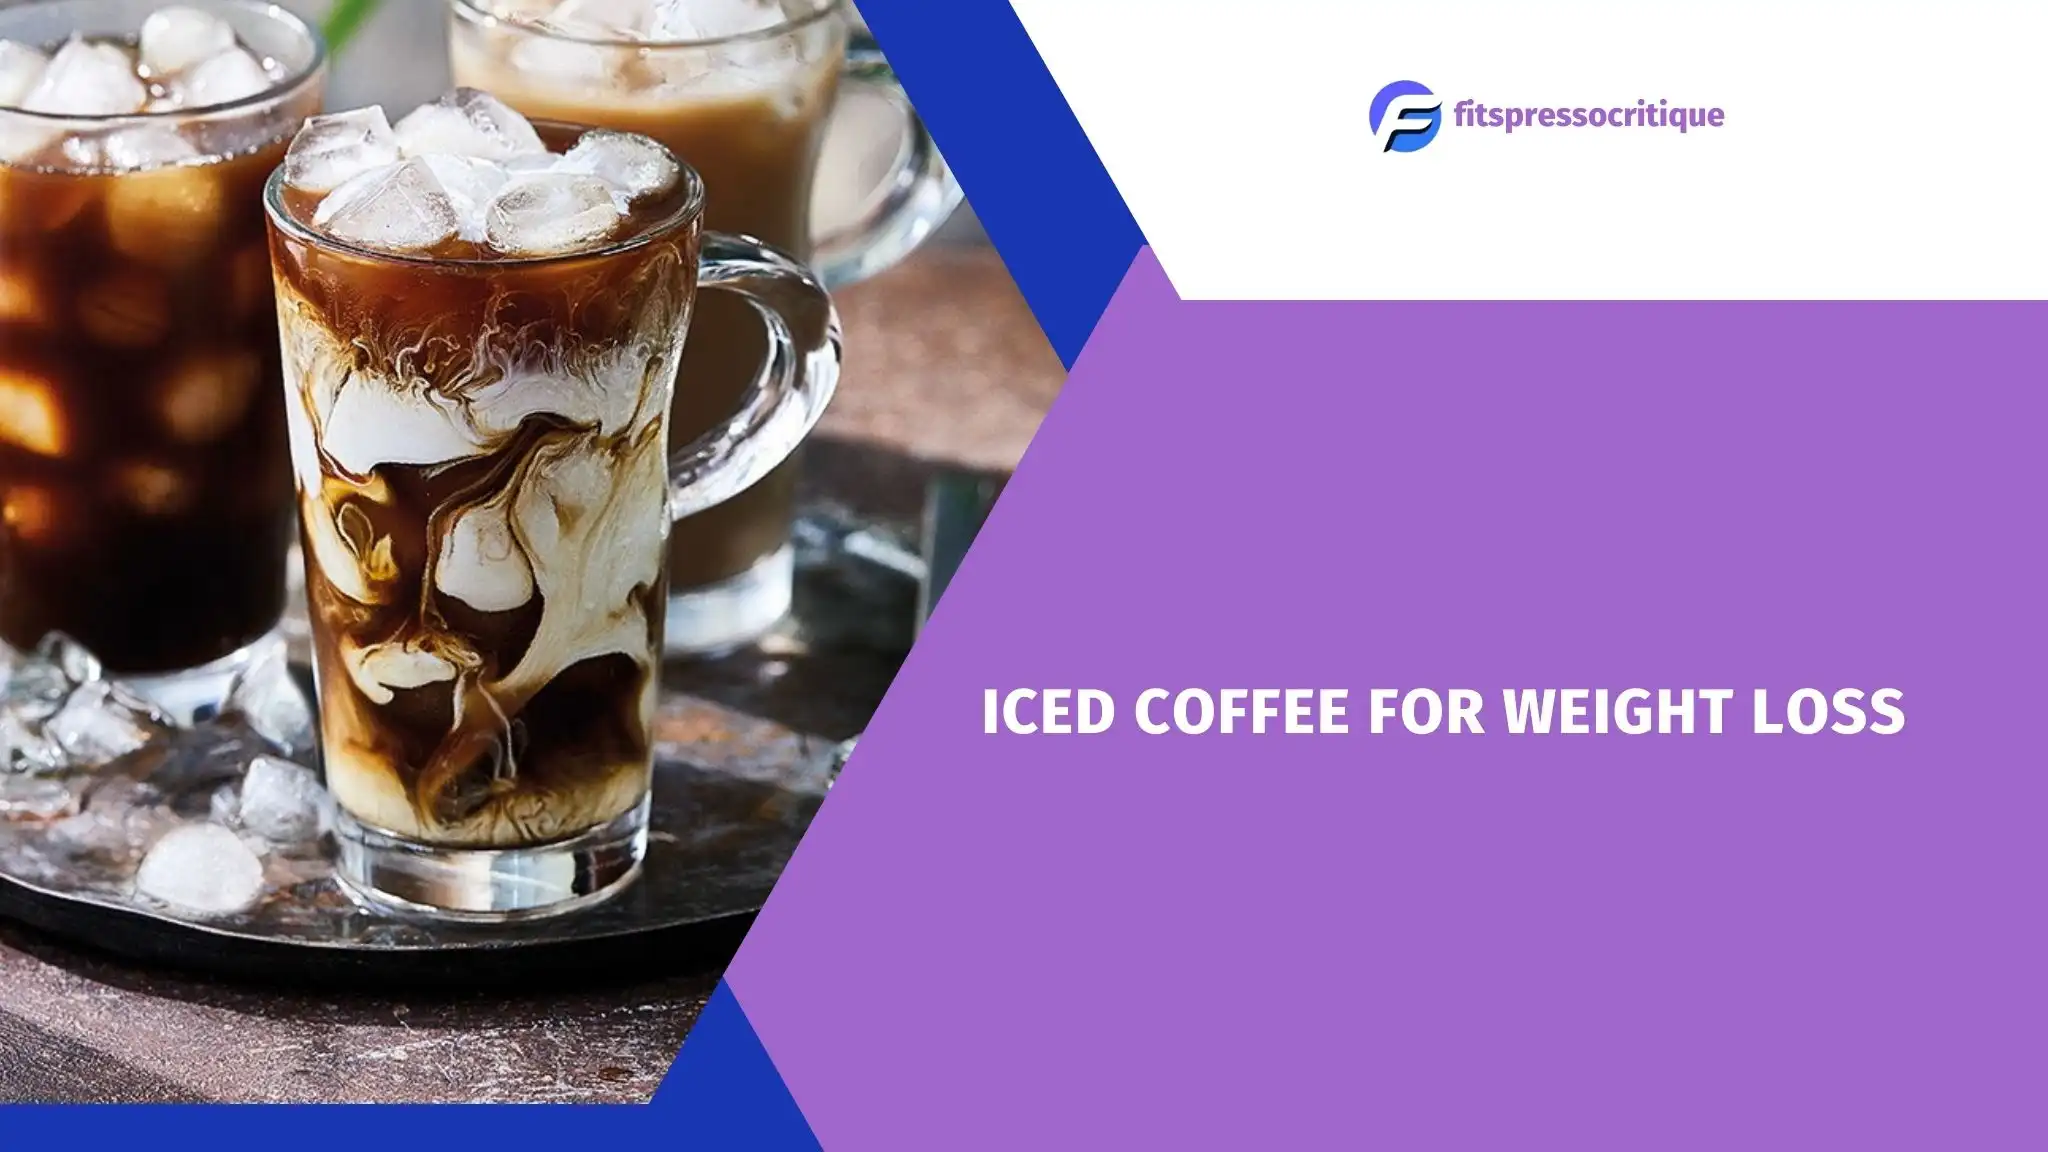 Iced Coffee For Weight Loss